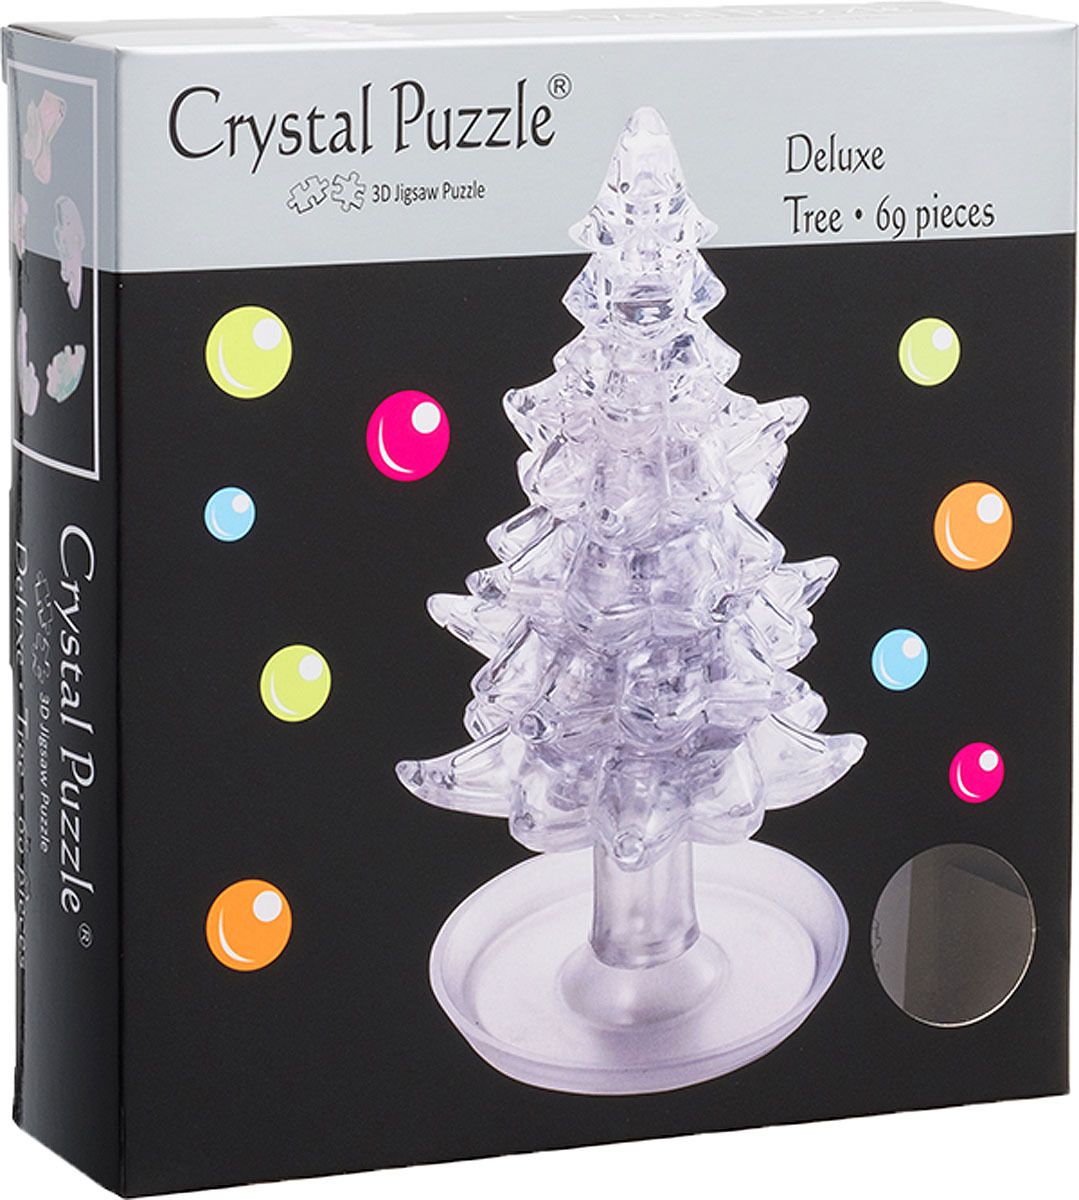  Crystal Puzzle 